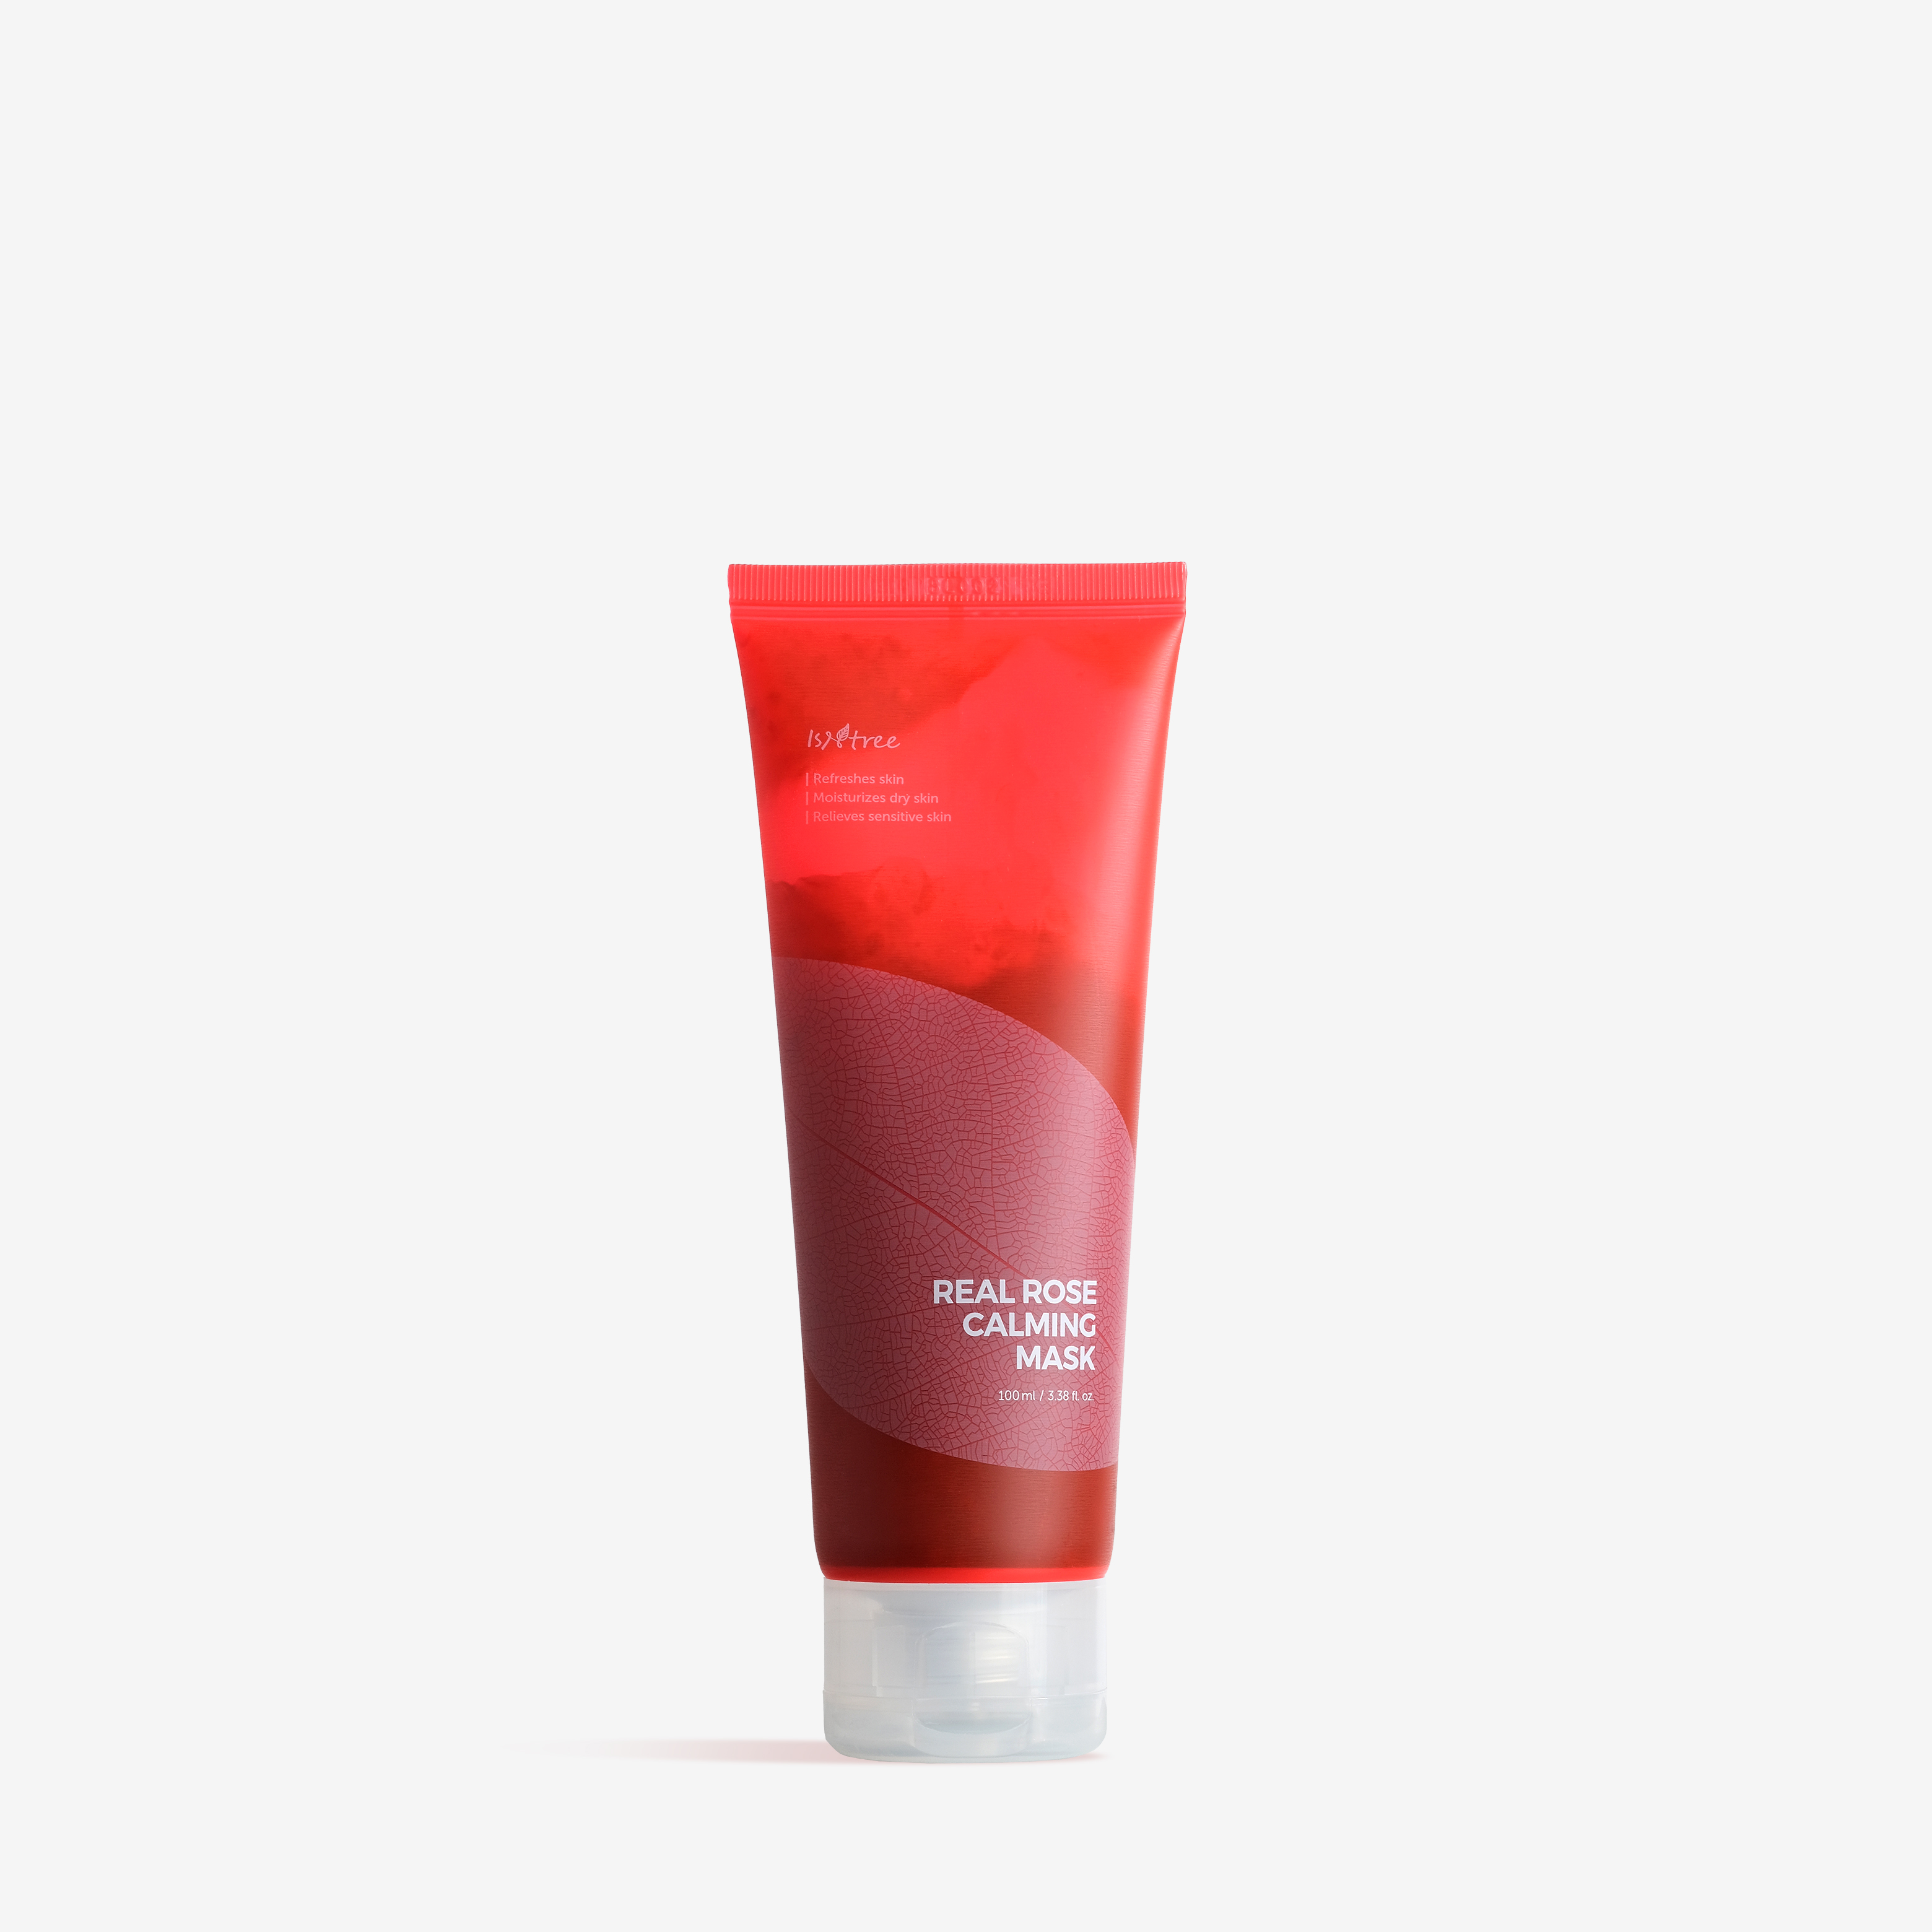 Real rose calming mask, Isntree